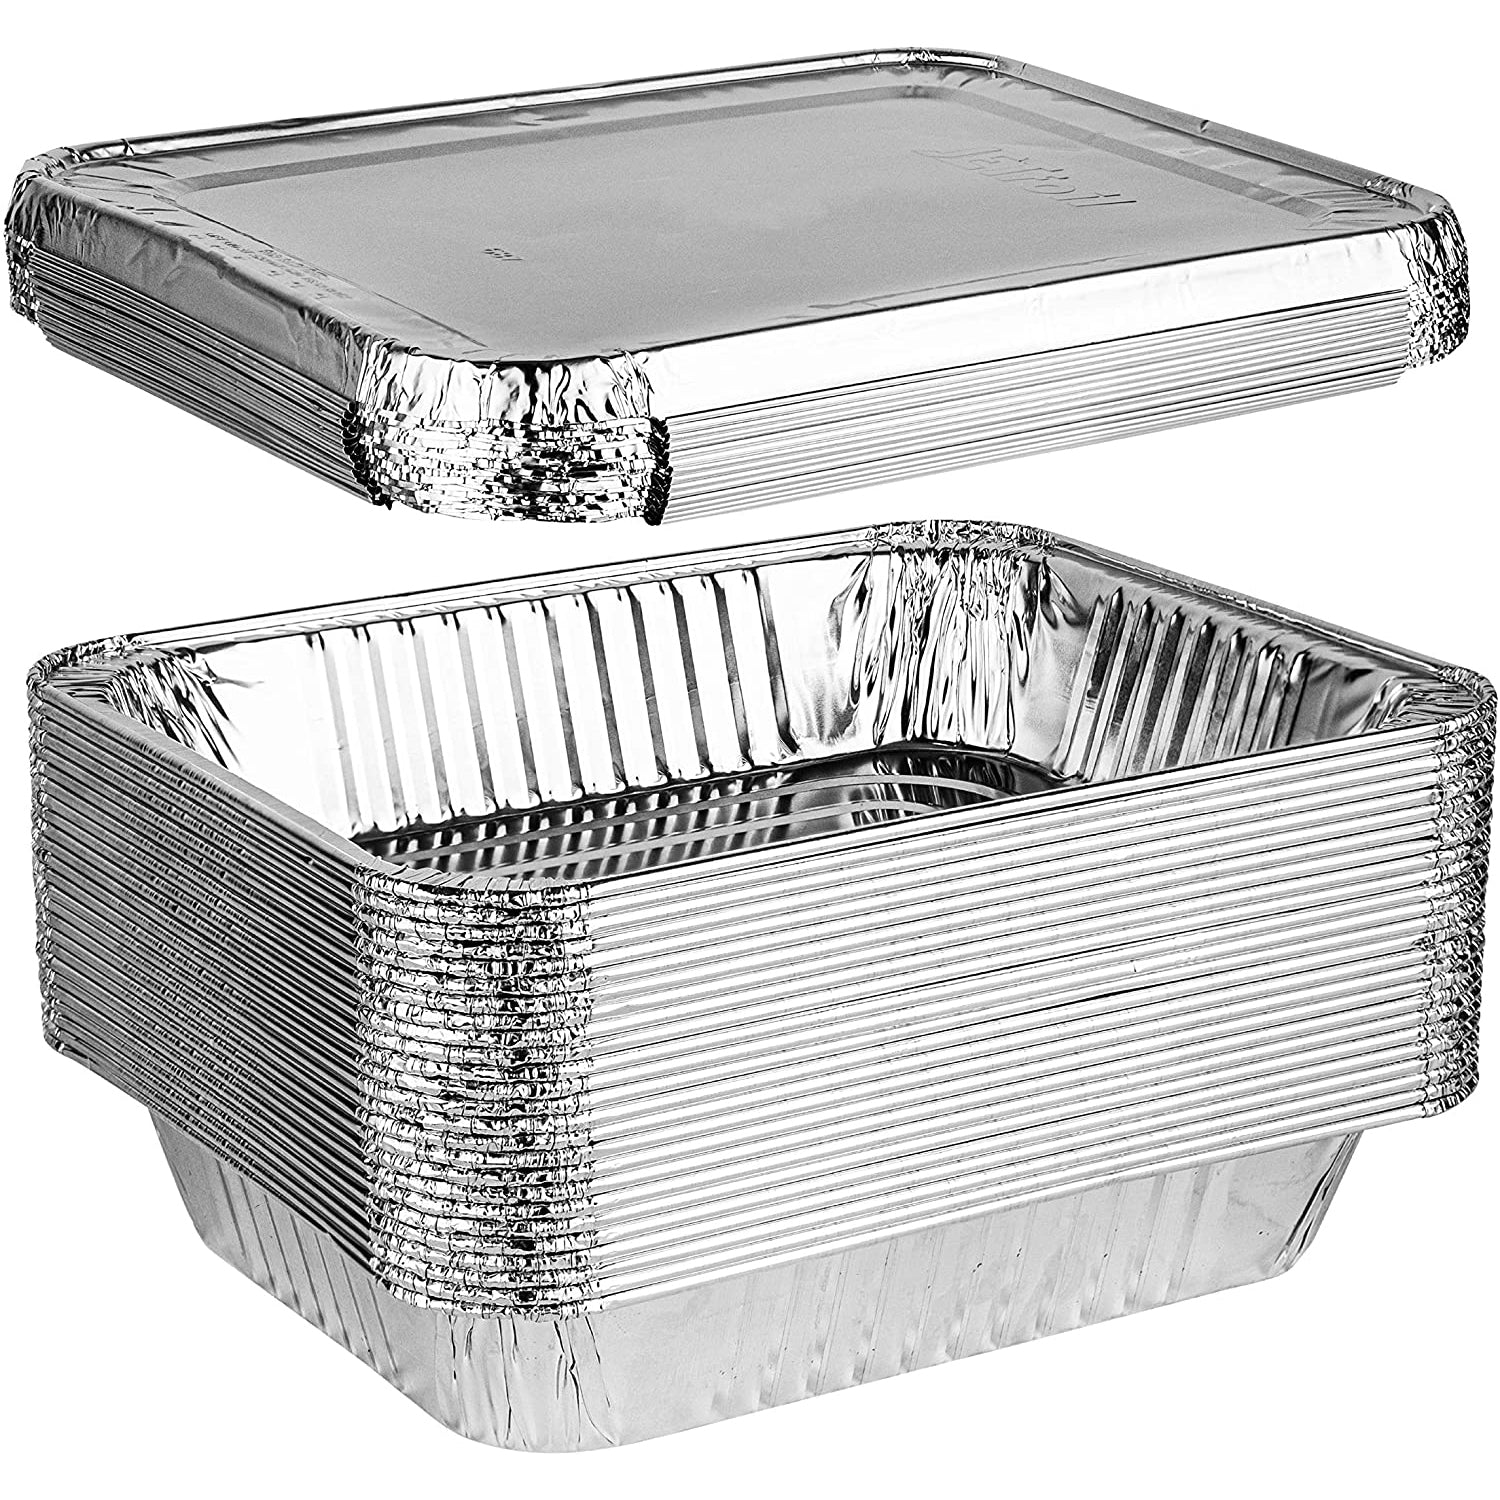 Smart Choice Disposable Aluminum Pans with Lids, (10 Pack) 9x13 Pans, Half size, Steam Table Pans, 12.75 x 10.5 x 2.25, Baking, Roasting, Chafing